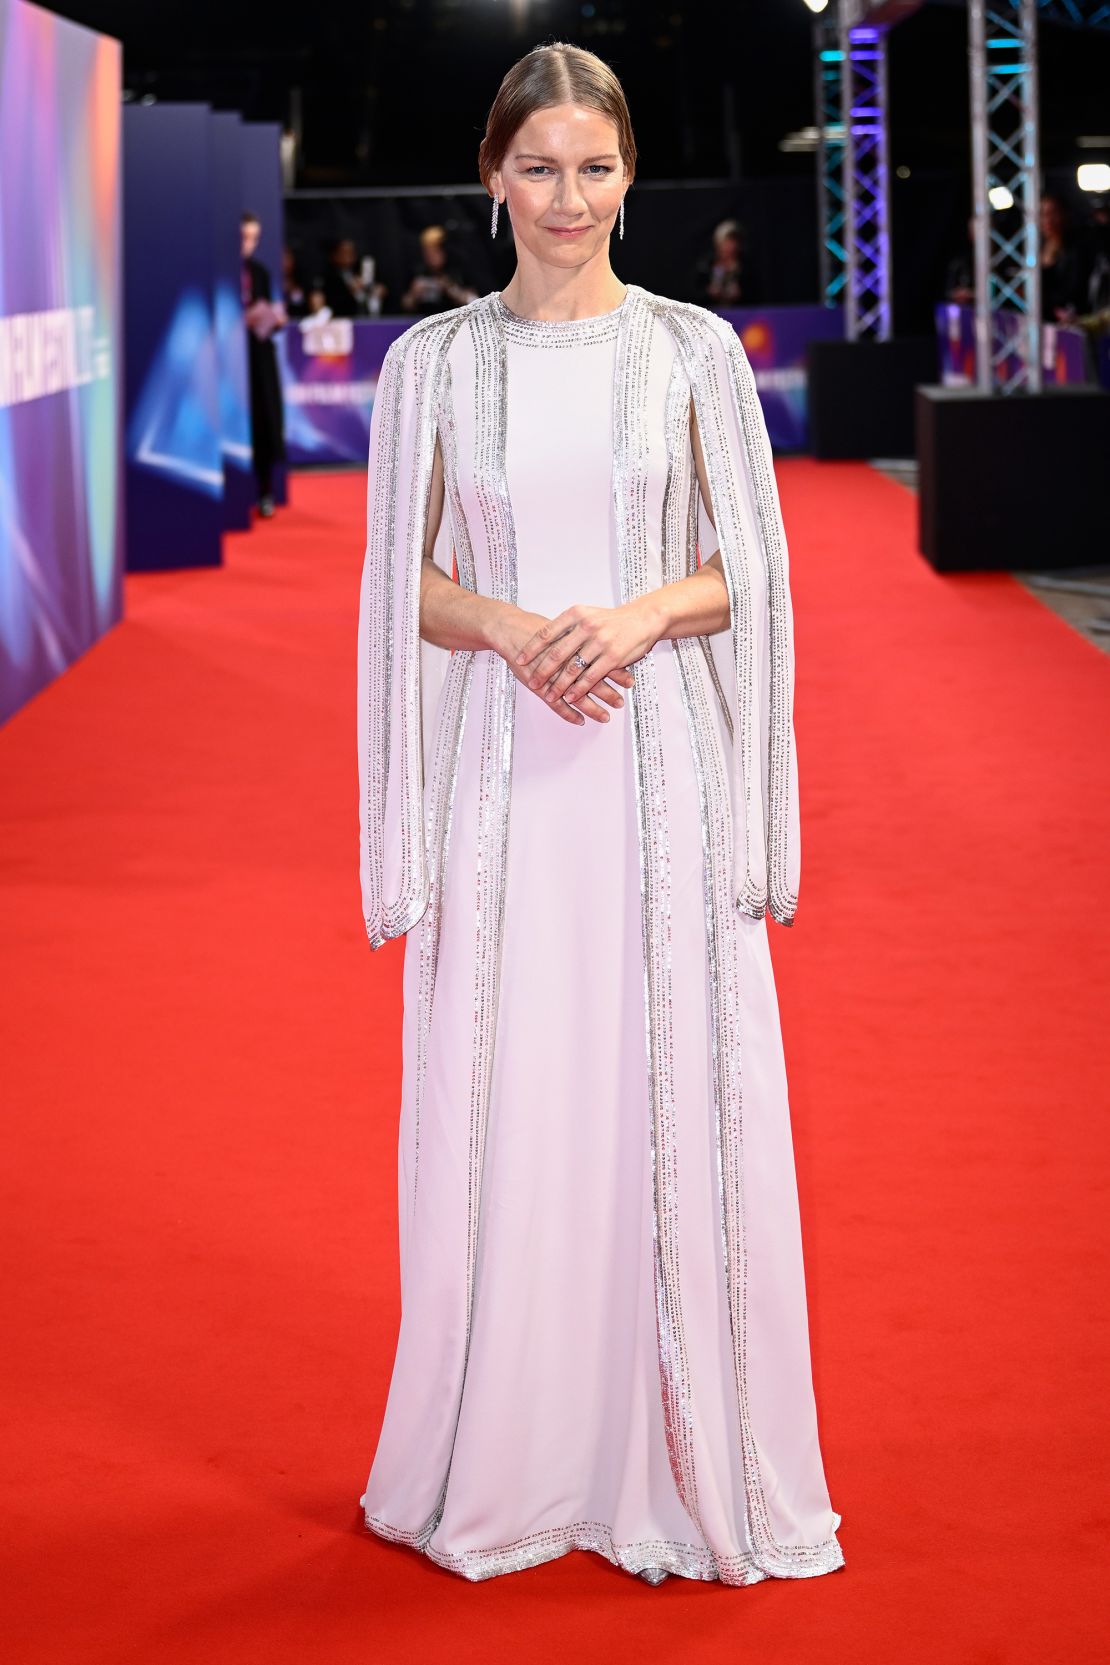 She was a shimmering vision in Dior couture at the 2023 London Film Festival.